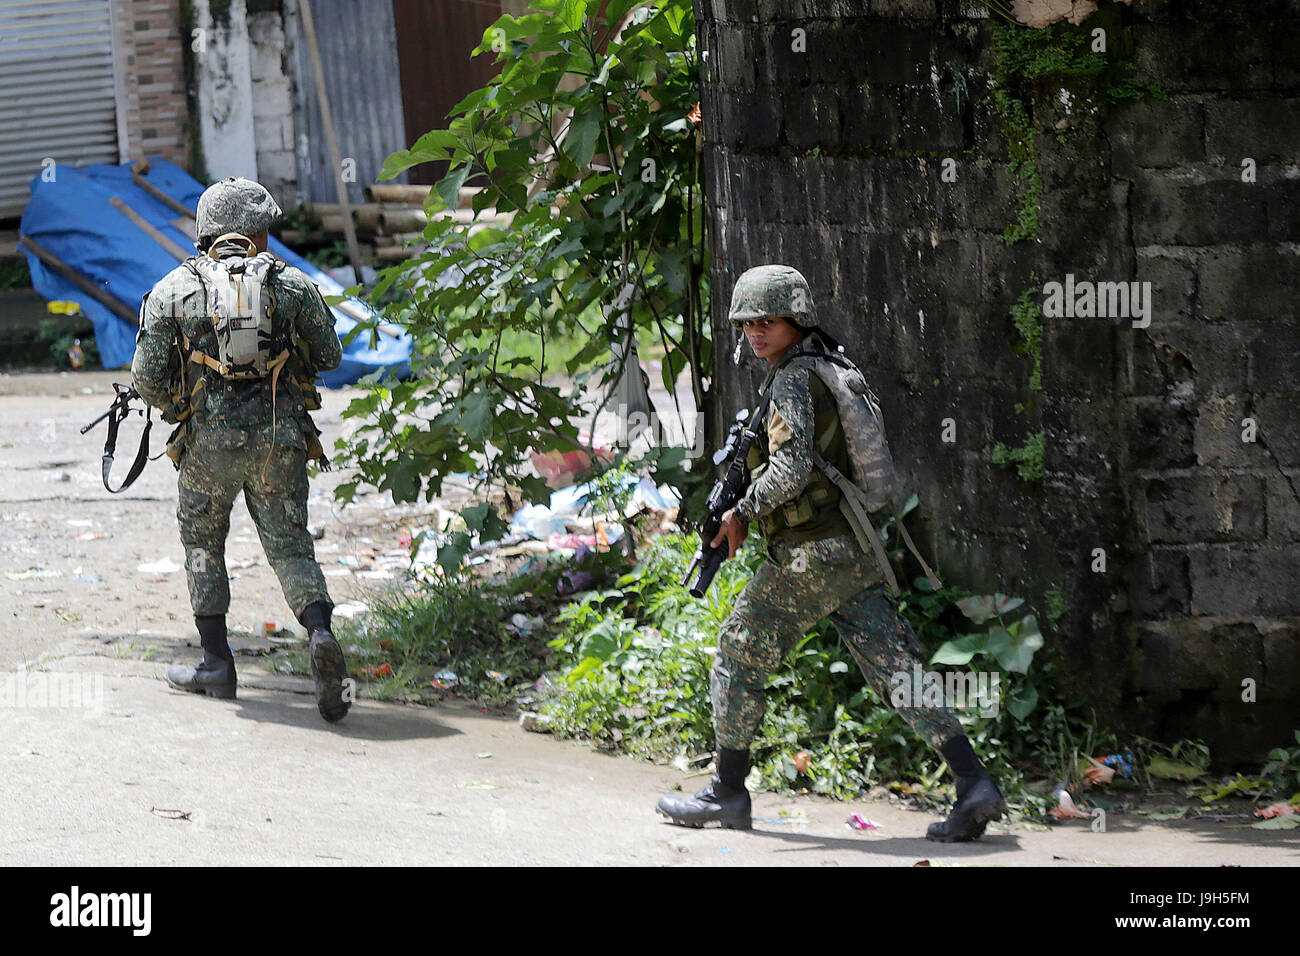 Marawi City, Philippines. 2nd June, 2017. Government soldiers secure an area in Lanao Del Sur Province, the Philippines, June 2, 2017. More elite troops were sent to the besieged Marawi City in the southern Philippines to flush the remaining members of the Maute militant group who are holed up in some parts of the city. Credit: Rouelle Umali/Xinhua/Alamy Live News Stock Photo